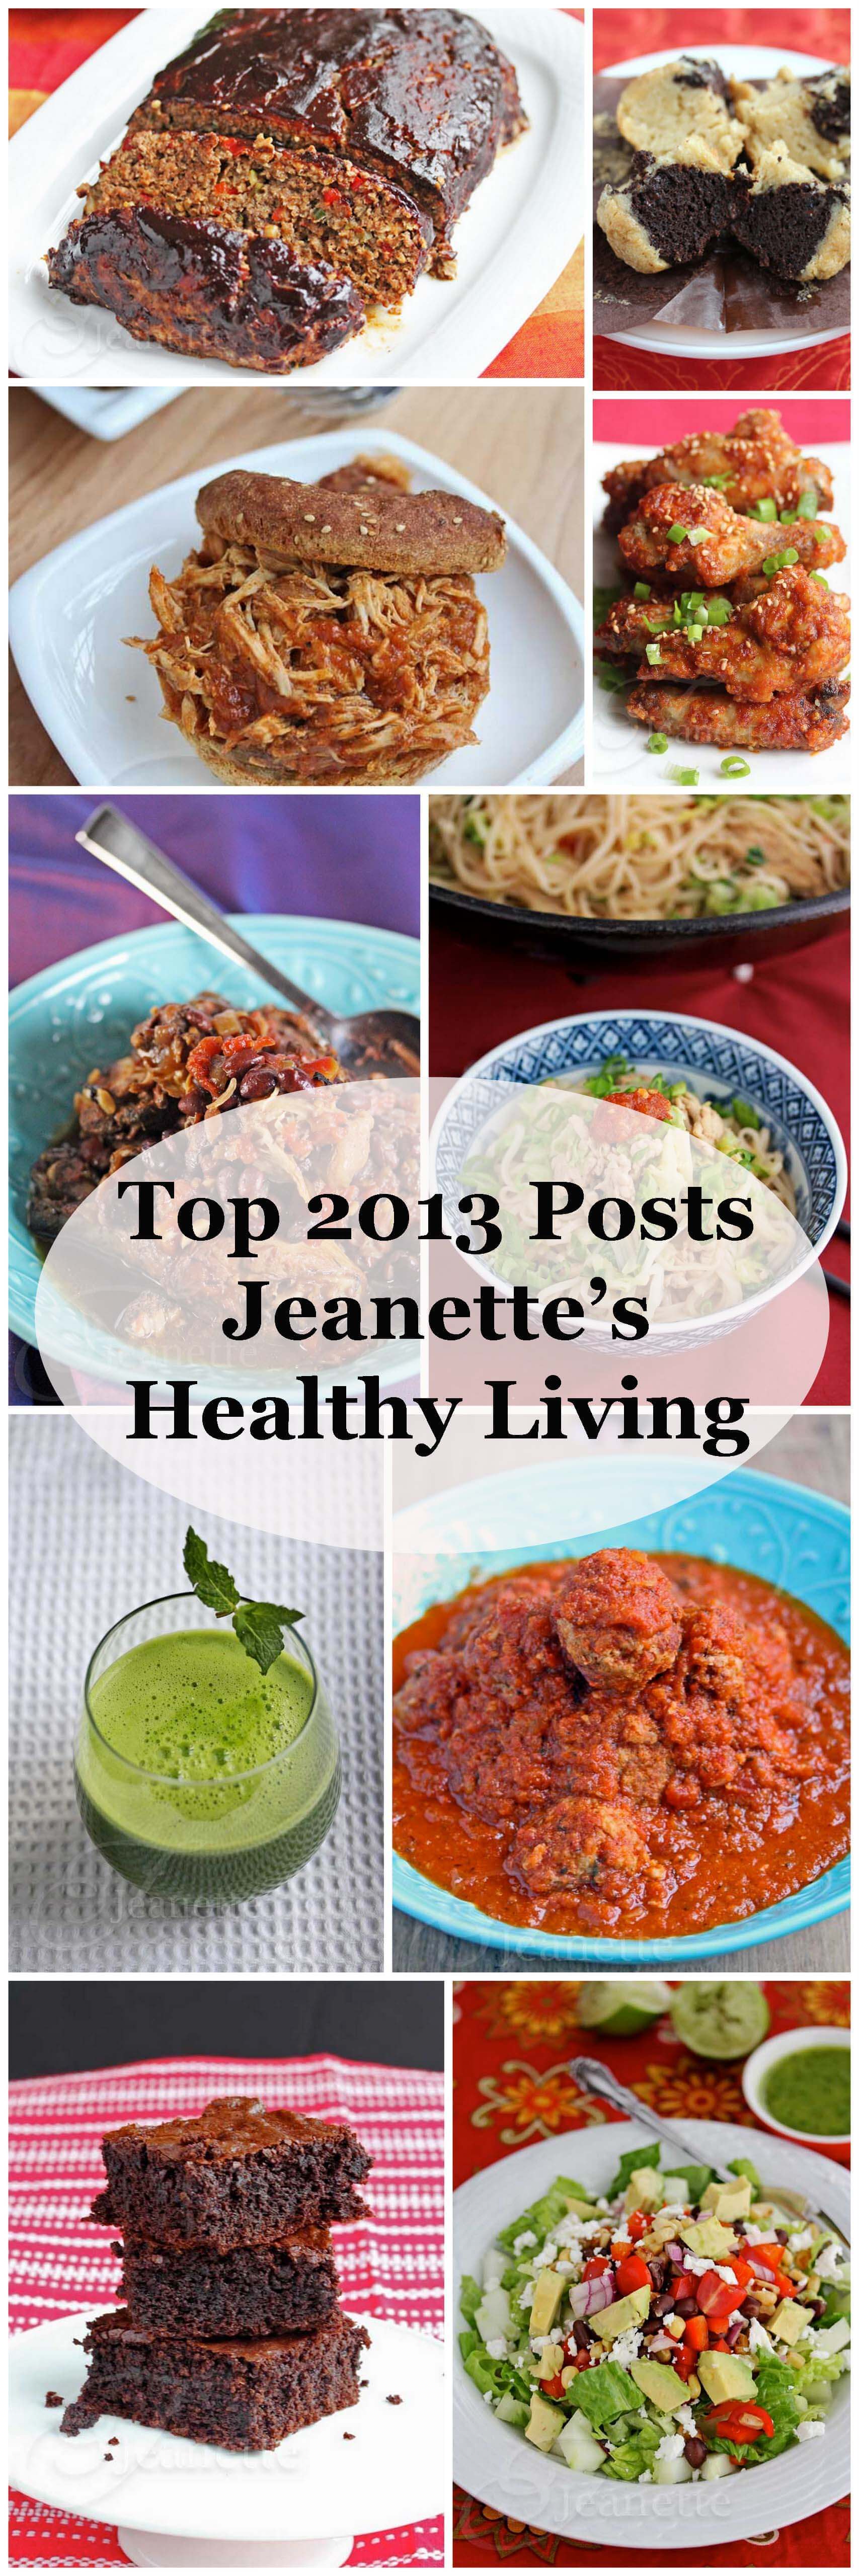 Top 2013 Posts Jeanette's Healthy Living